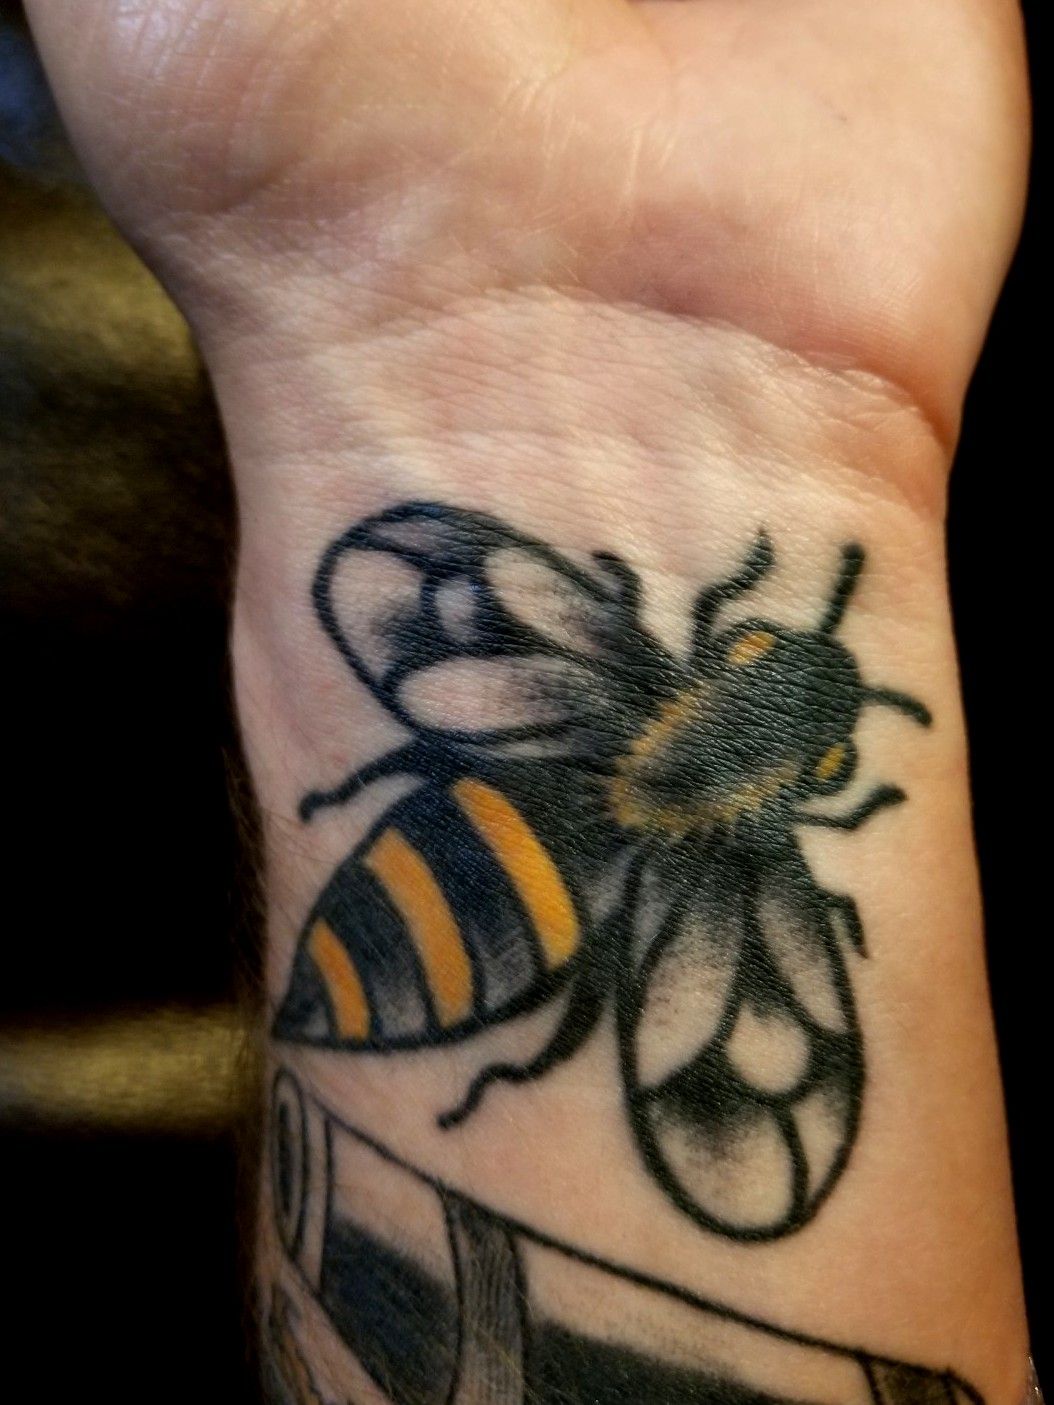 Tattoo uploaded by Nick Reed  American Traditional honey bee  traditionaltattoos honeybee  Tattoodo